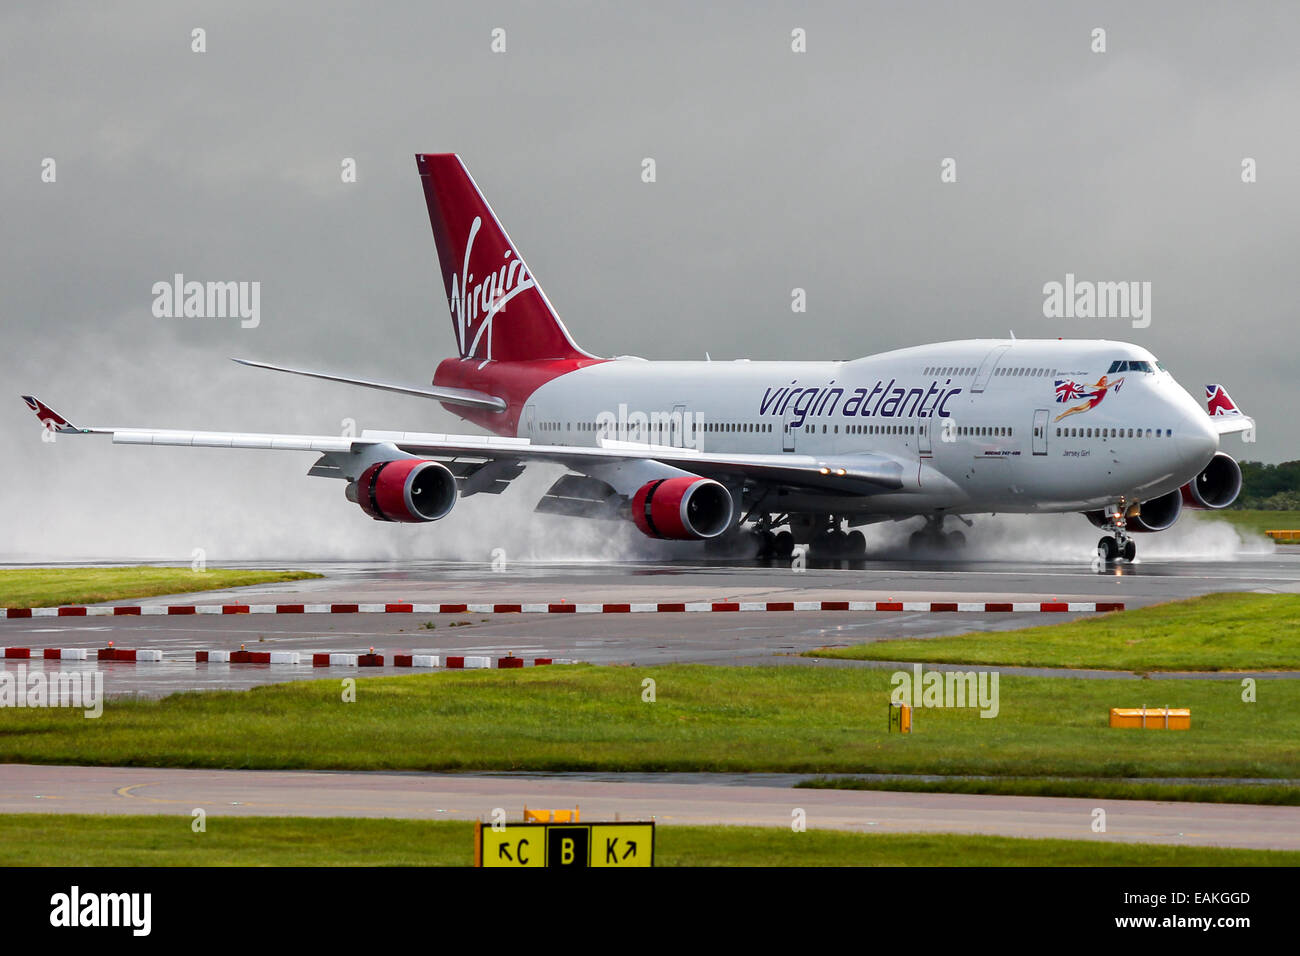 Virgin Atlantic Boeing 747-400 decelerates on runway 23R after a heavy rain shower at Manchester Airport. Stock Photo